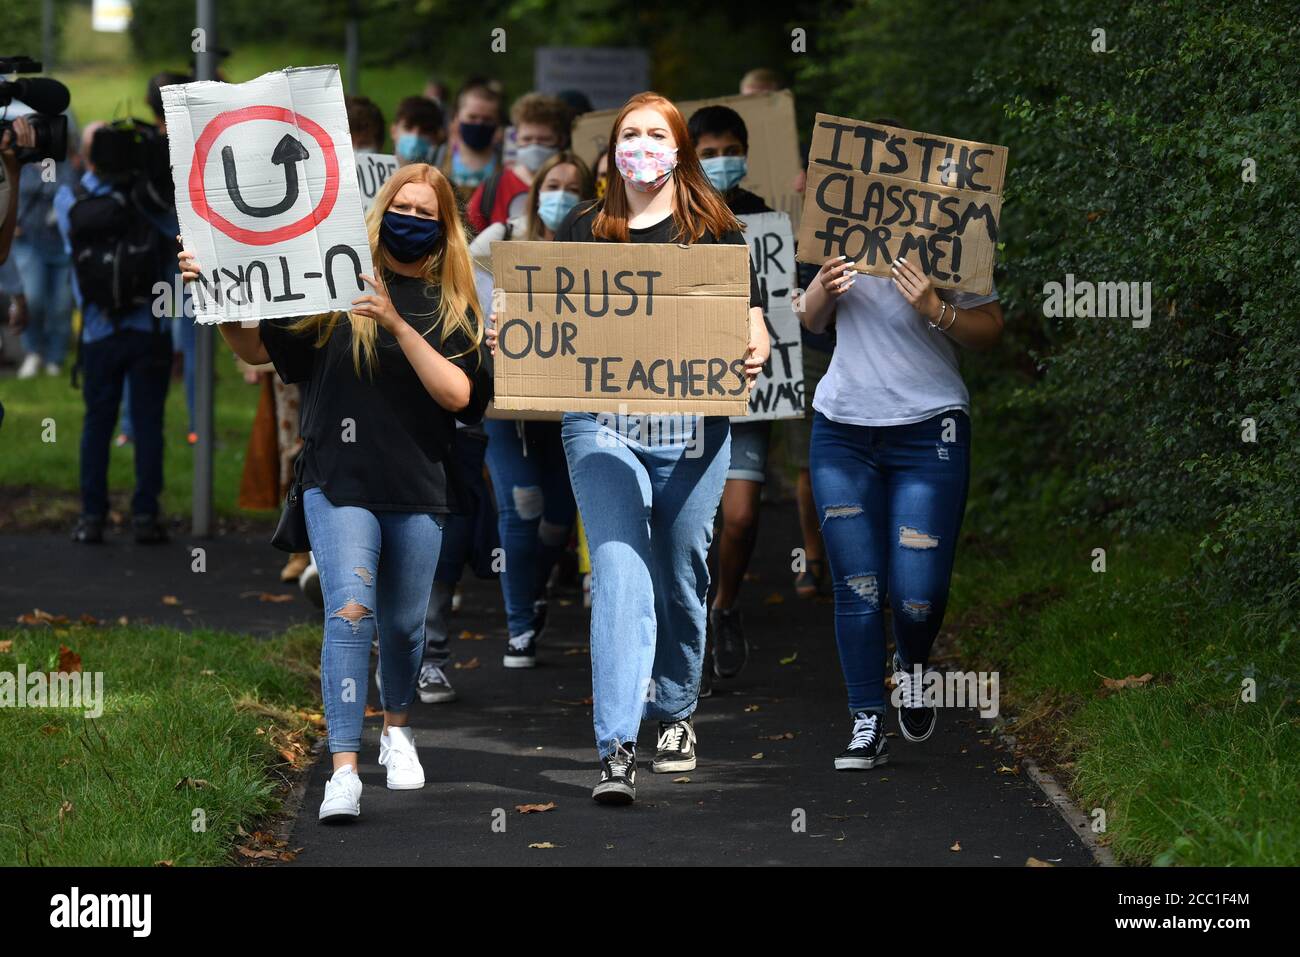 Students from Codsall Community High School march to the constituency office of their local MP Gavin Williamson, who is also the Education Secretary, as a protest over the continuing issues of last week's A level results which saw some candidates receive lower-than-expected grades after their exams were cancelled as a result of coronavirus. Stock Photo